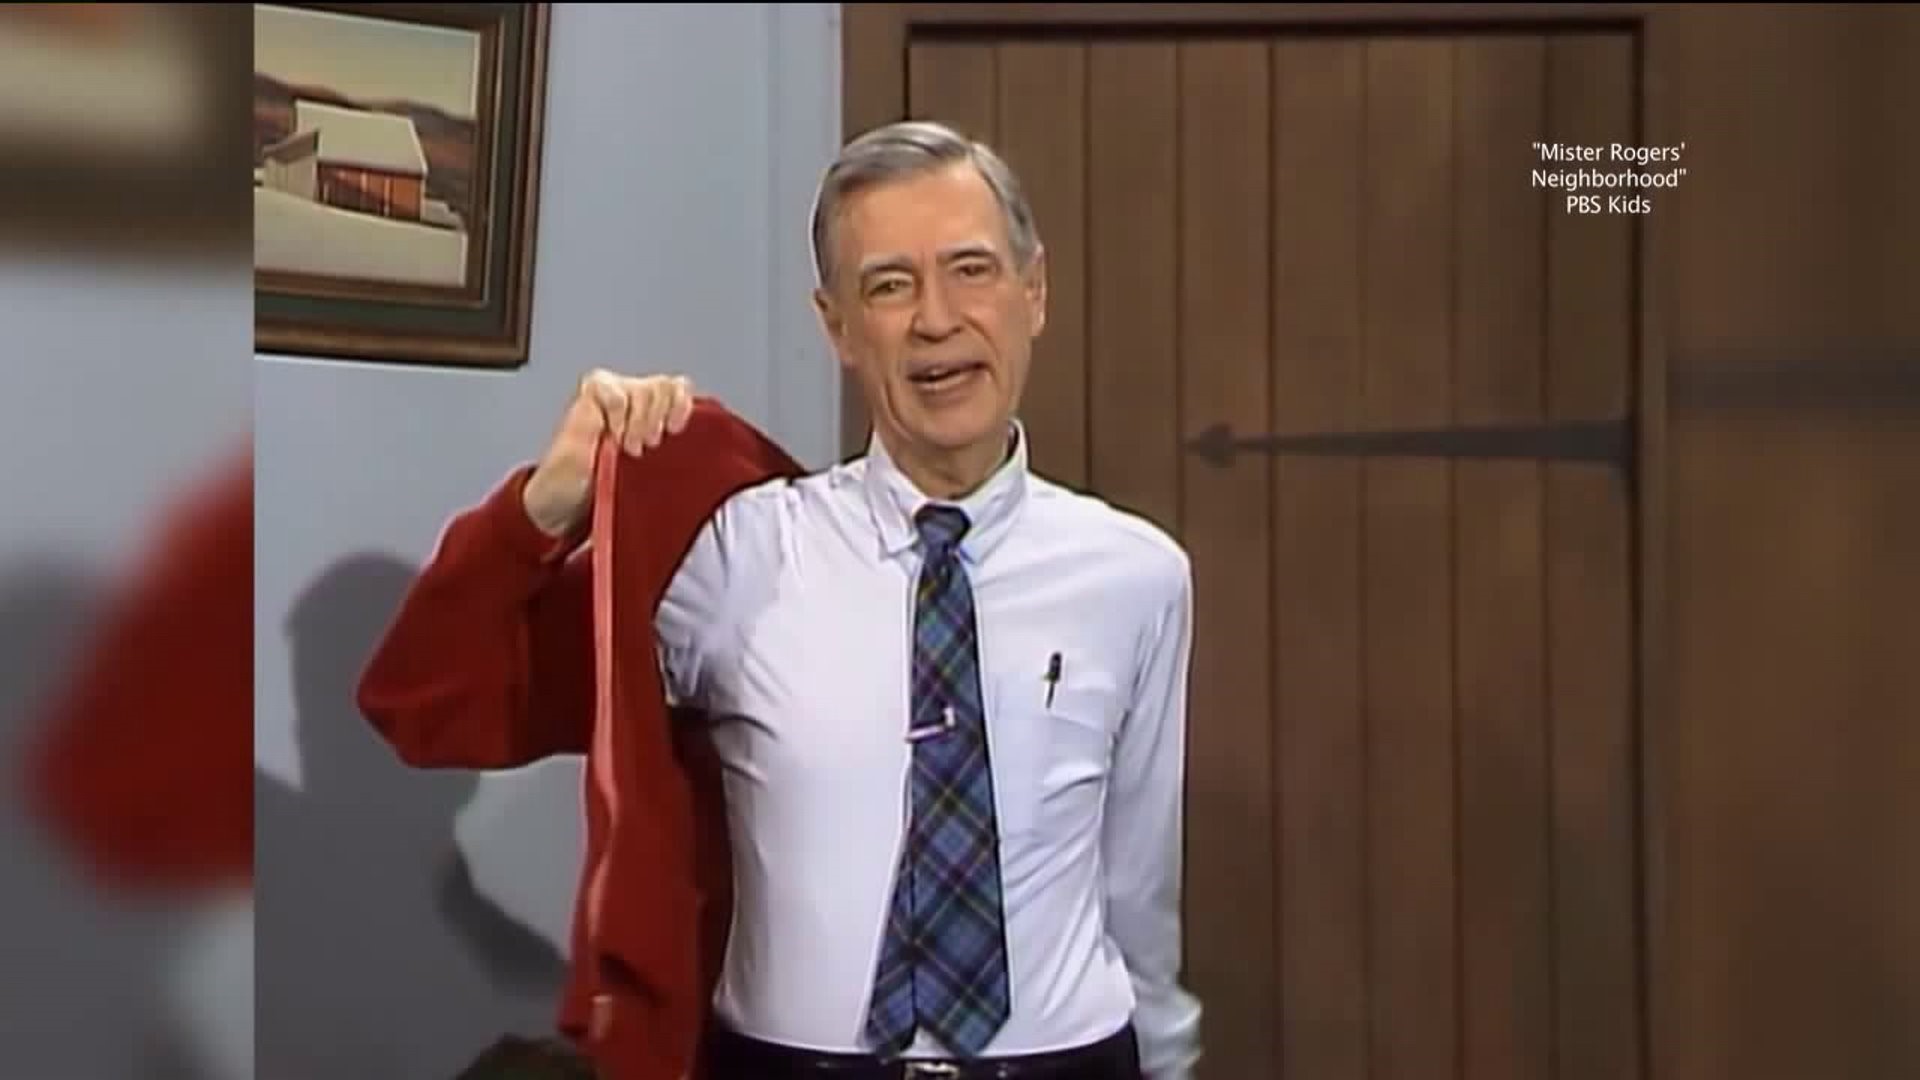 Governor Declares May 23 as '1-4-3 Day' in Honor of Mister Rogers